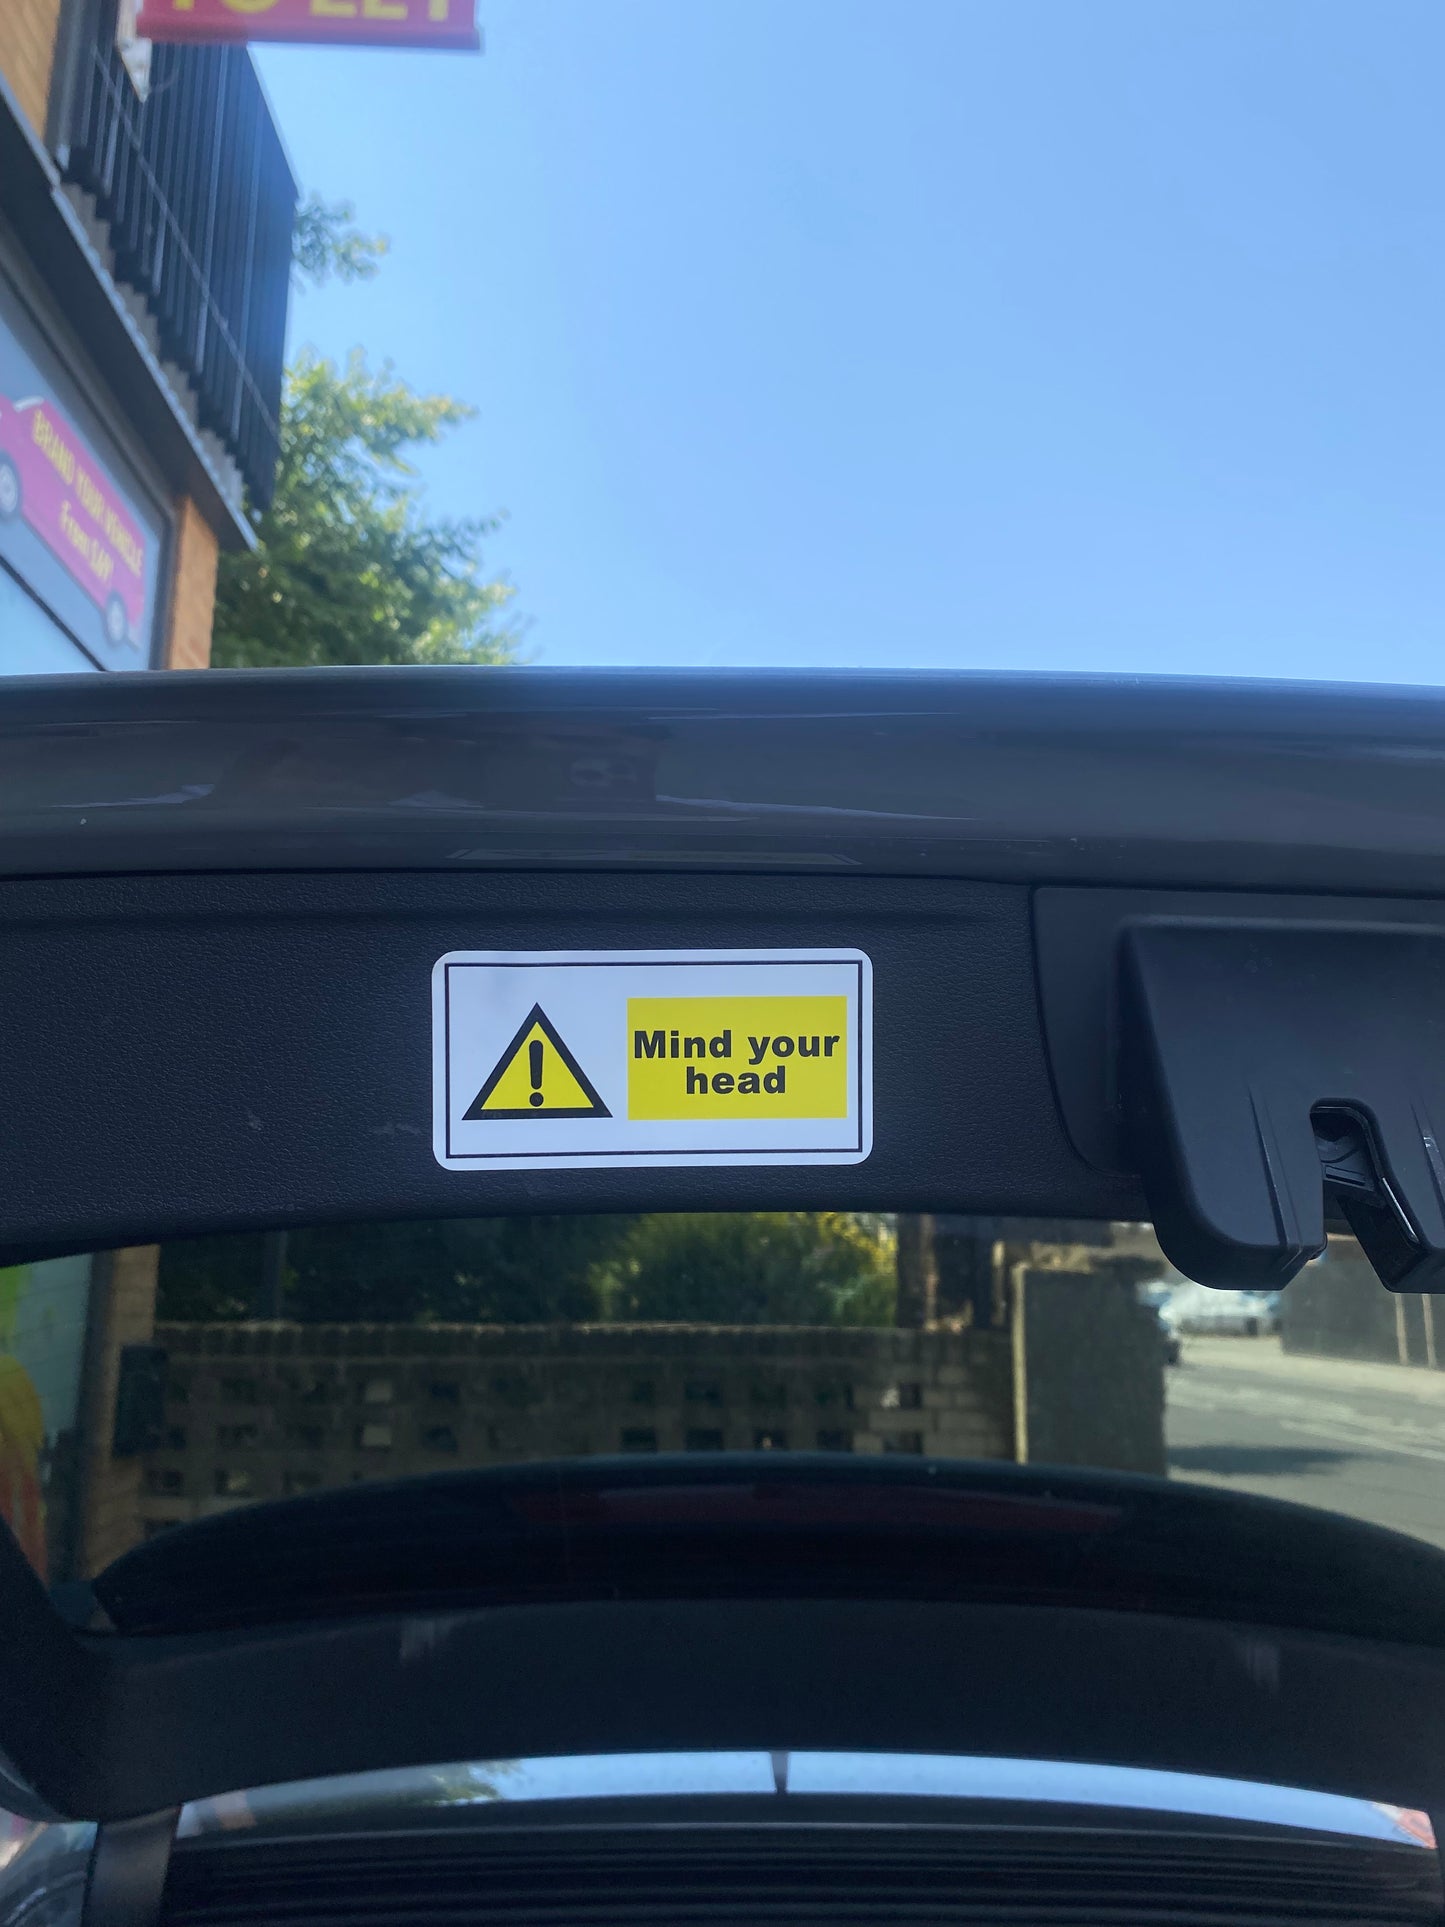 Cab / Taxi / Uber Safety Stickers